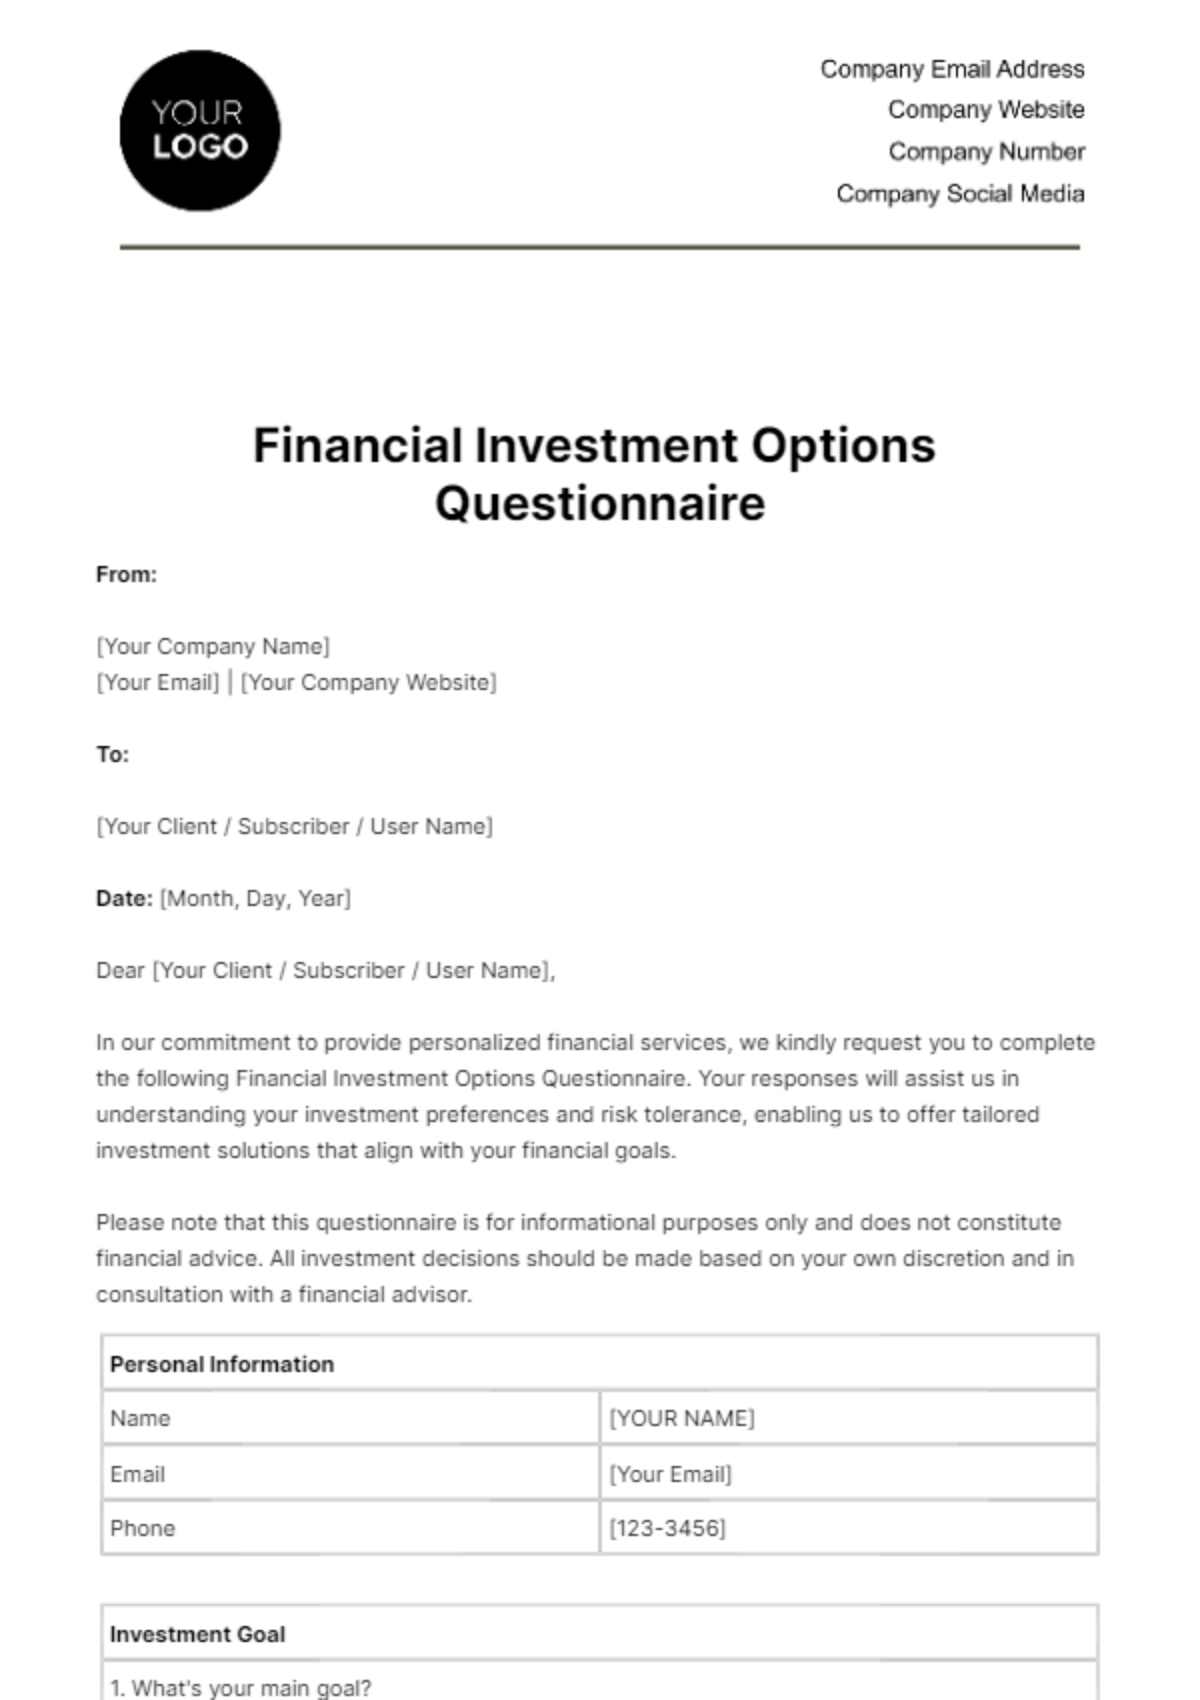 Financial Investment Options Questionnaire Template